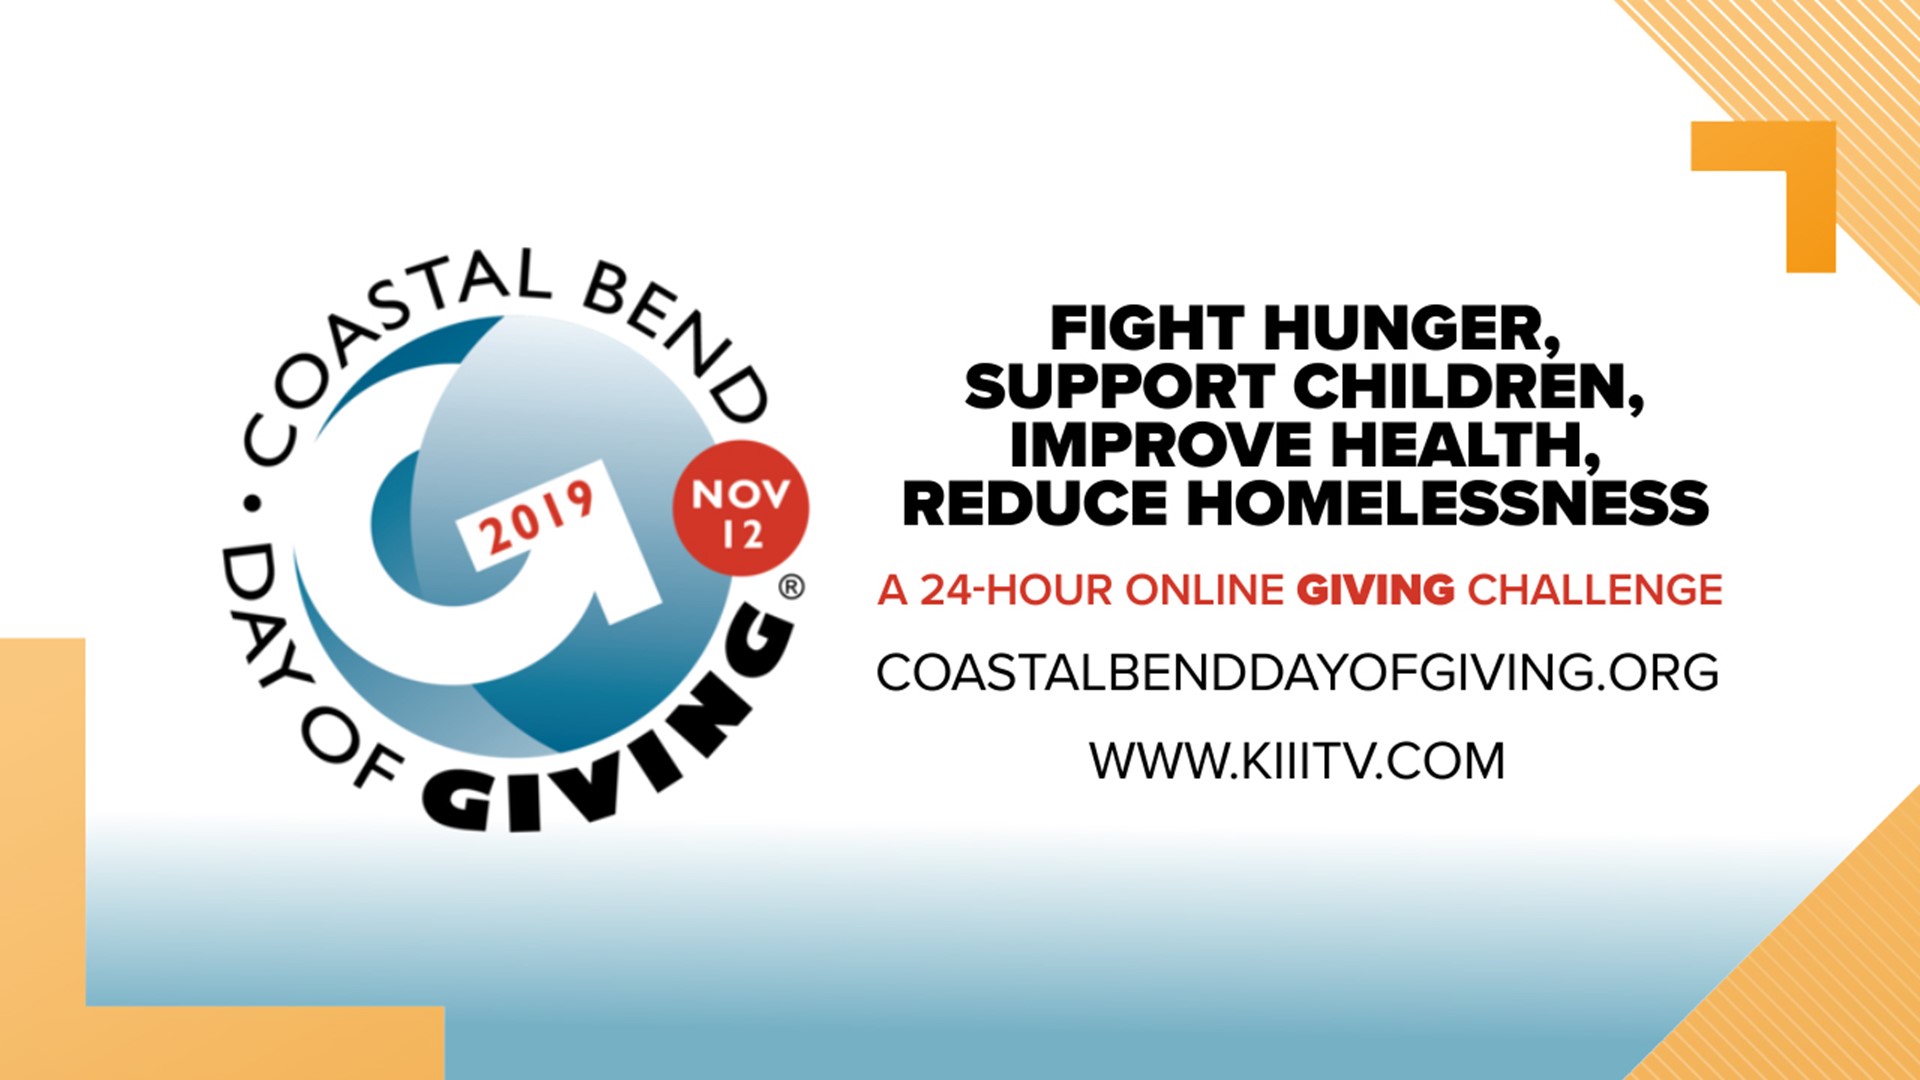 The 11th annual Coastal Bend Day of Giving kicked off Tuesday at midnight.